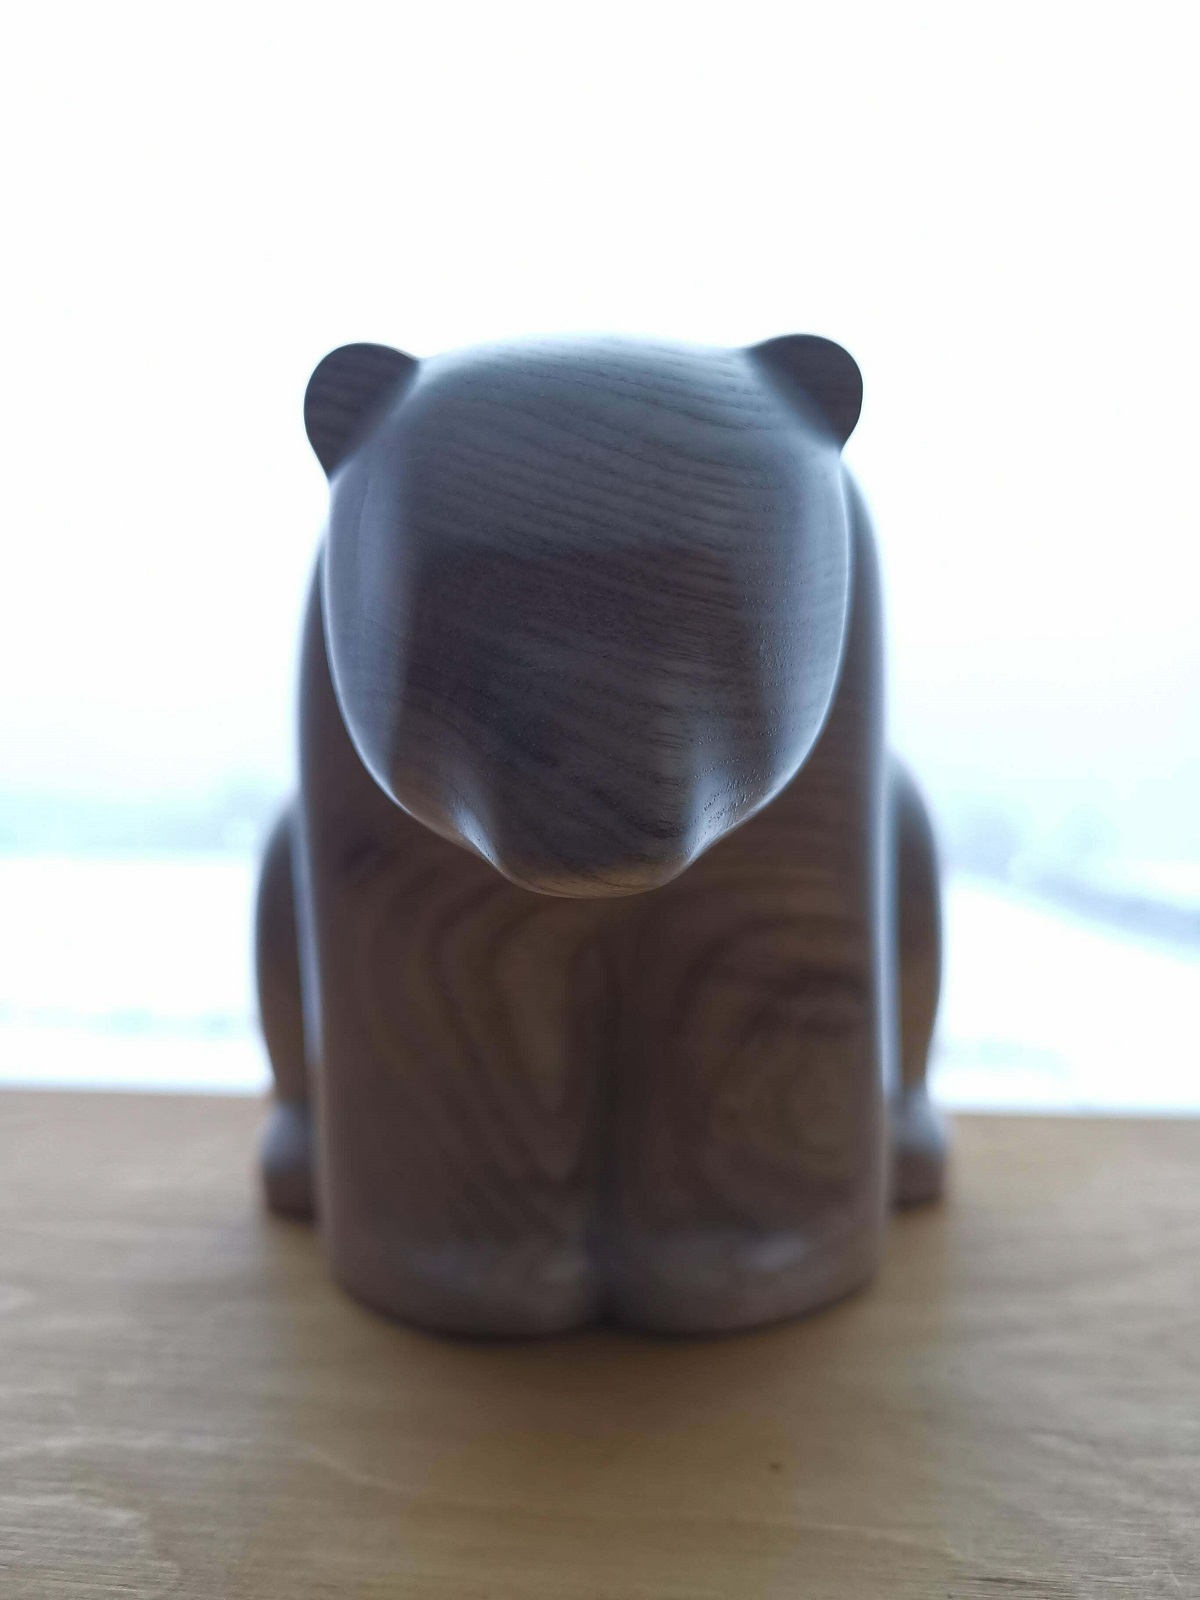 Polar Bear In Ash - First Carving That's Not A Spoon